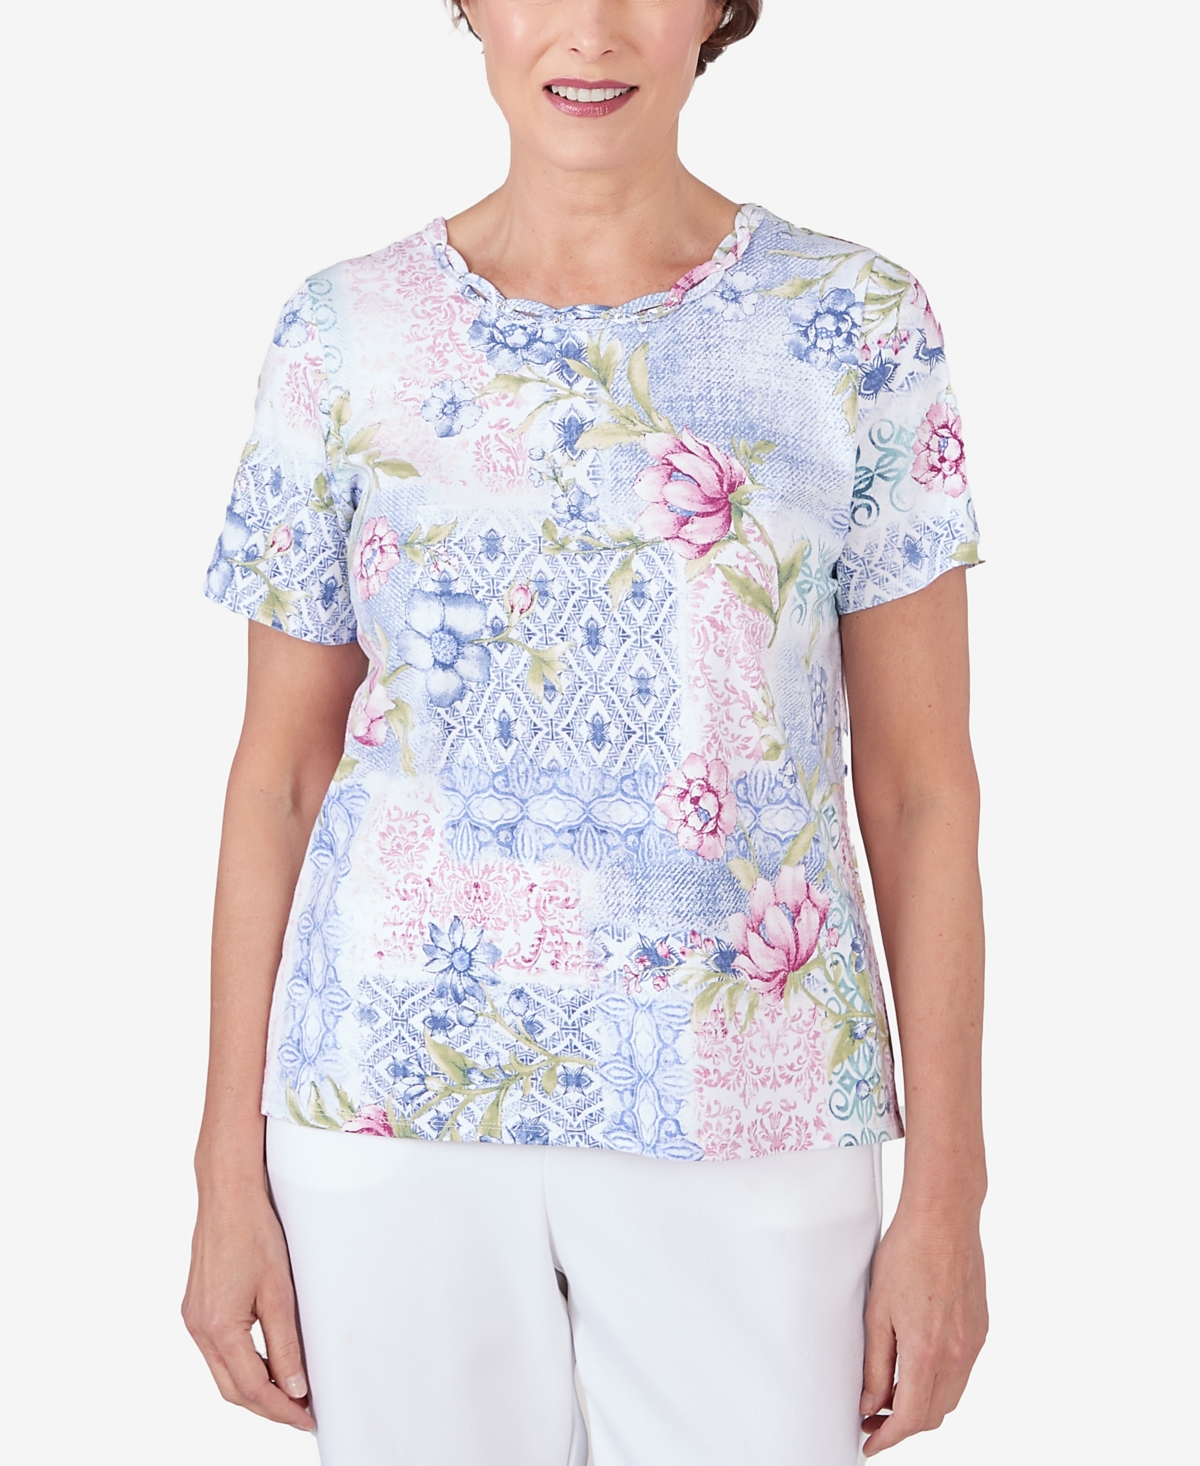 Petite Patchwork Floral Braided Neck Tee - Pastel